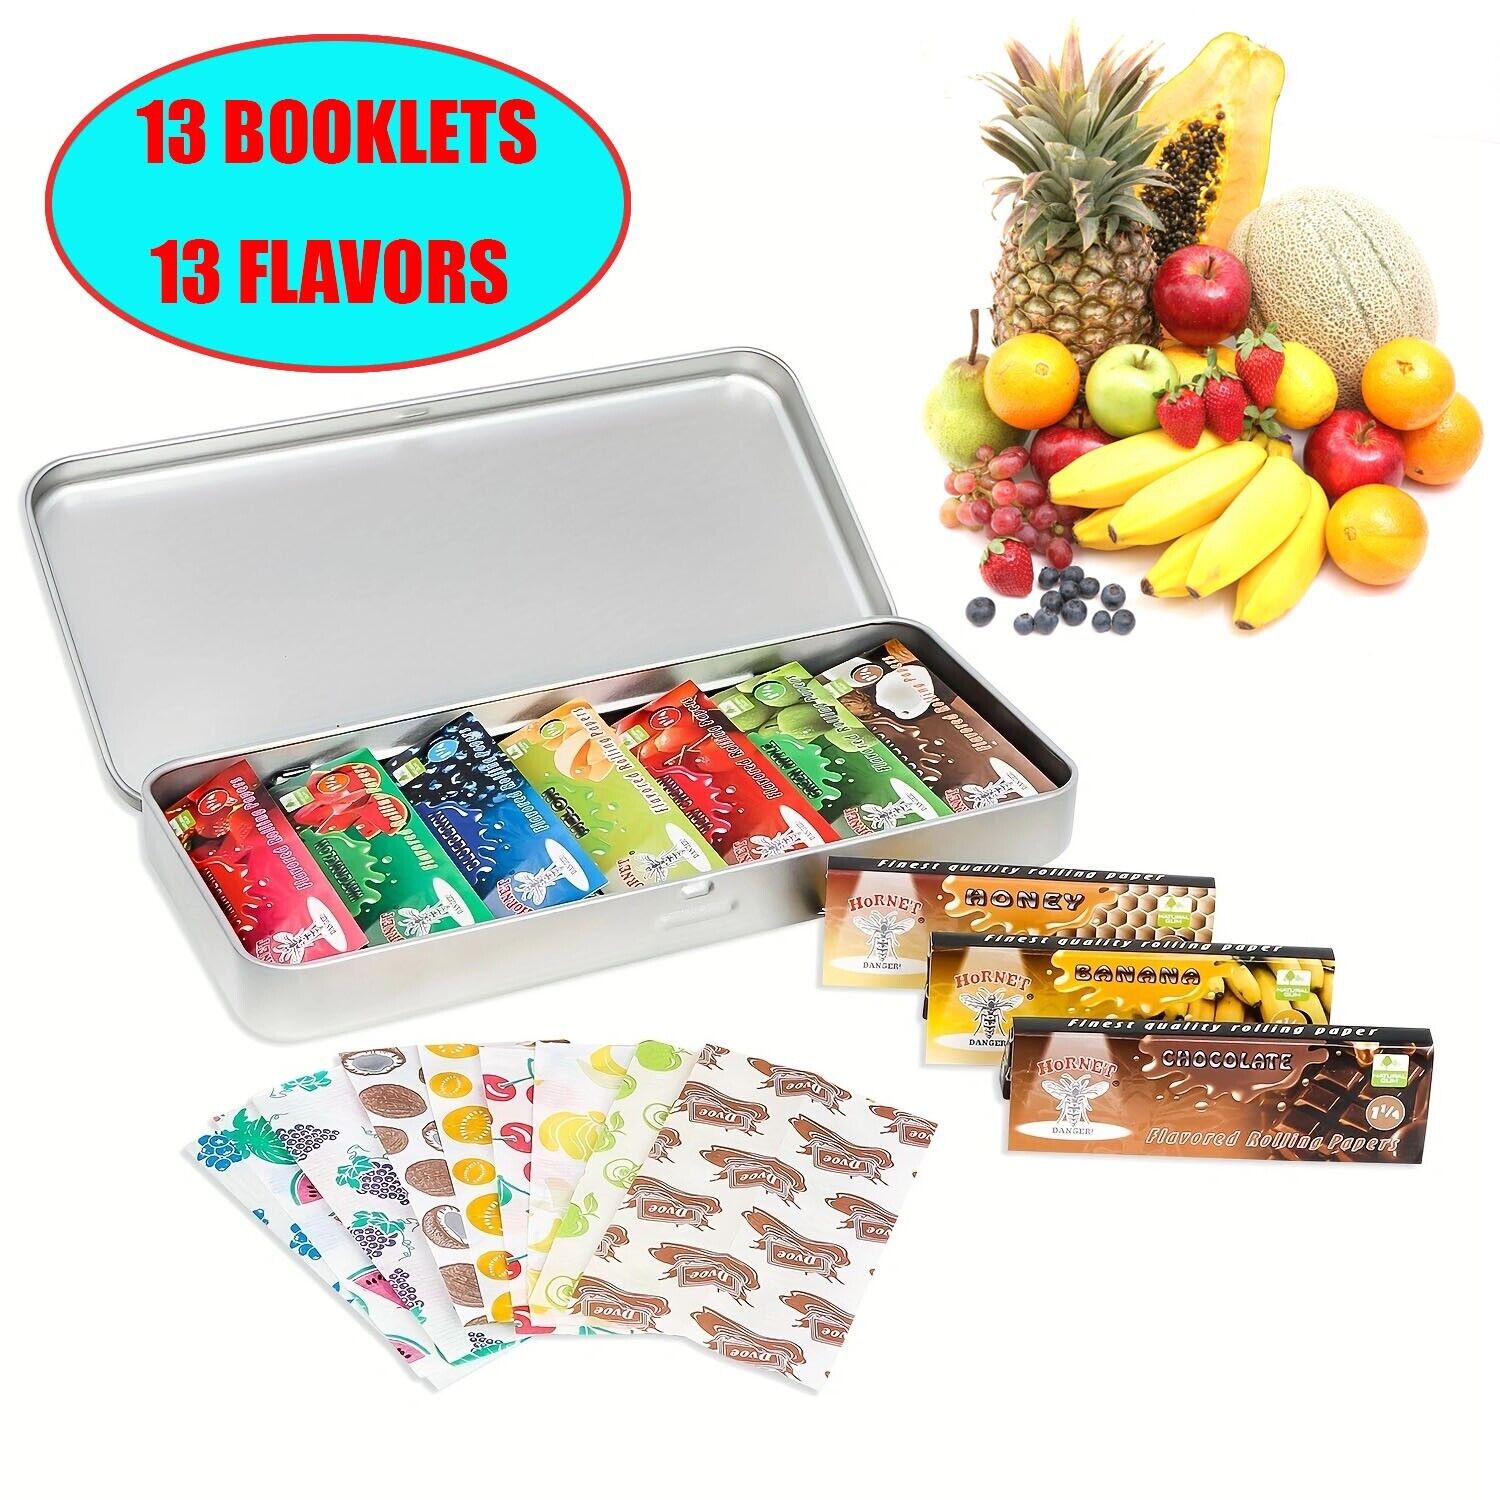 HORNET 13Packs 11/4 Size Classic Mix Fruit Flavor Rolling Papers With Filter Tip